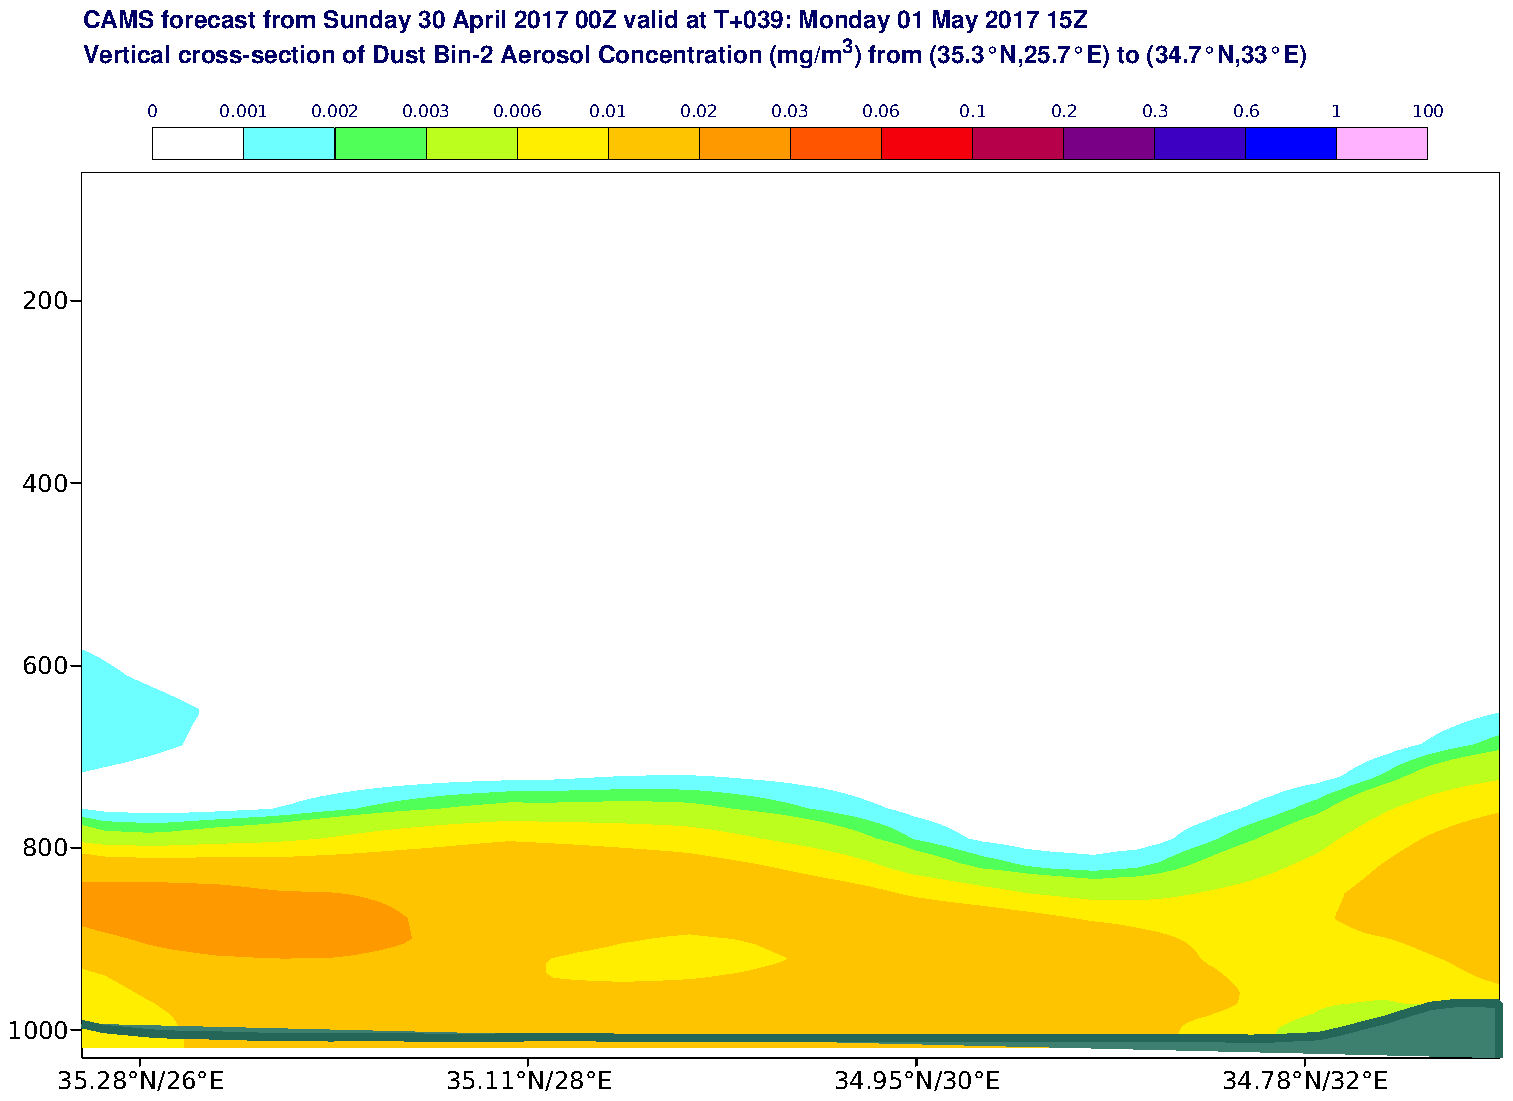 Vertical cross-section of Dust Bin-2 Aerosol Concentration (mg/m3) valid at T39 - 2017-05-01 15:00